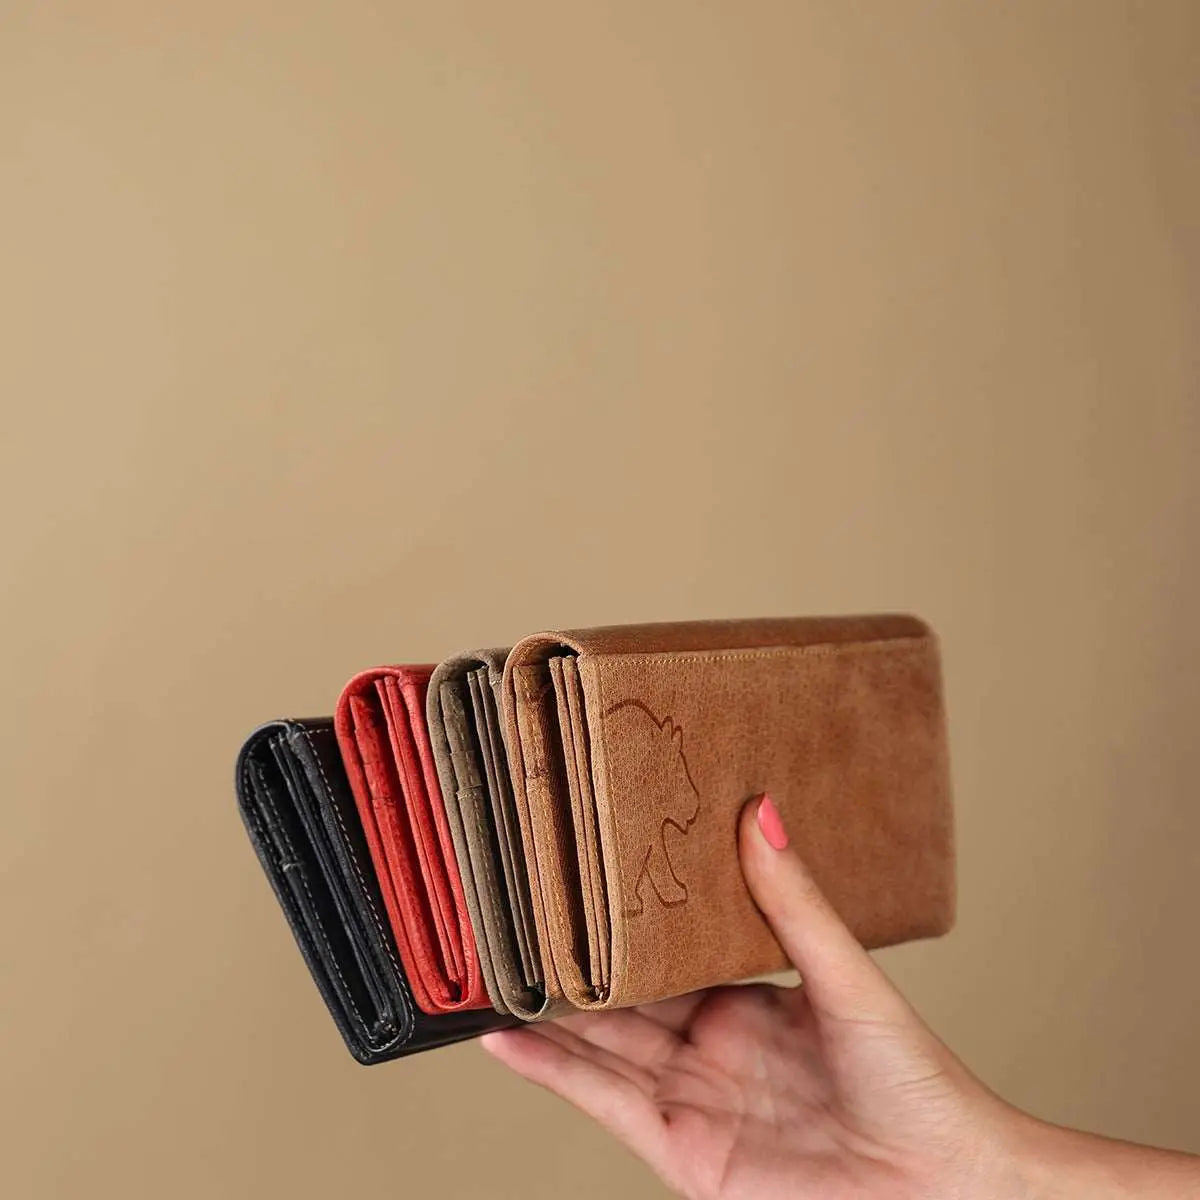 Handcrafted Leather Wallets: Unique Gifts for Women, Personalized and  Contemporary Boho - Etsy